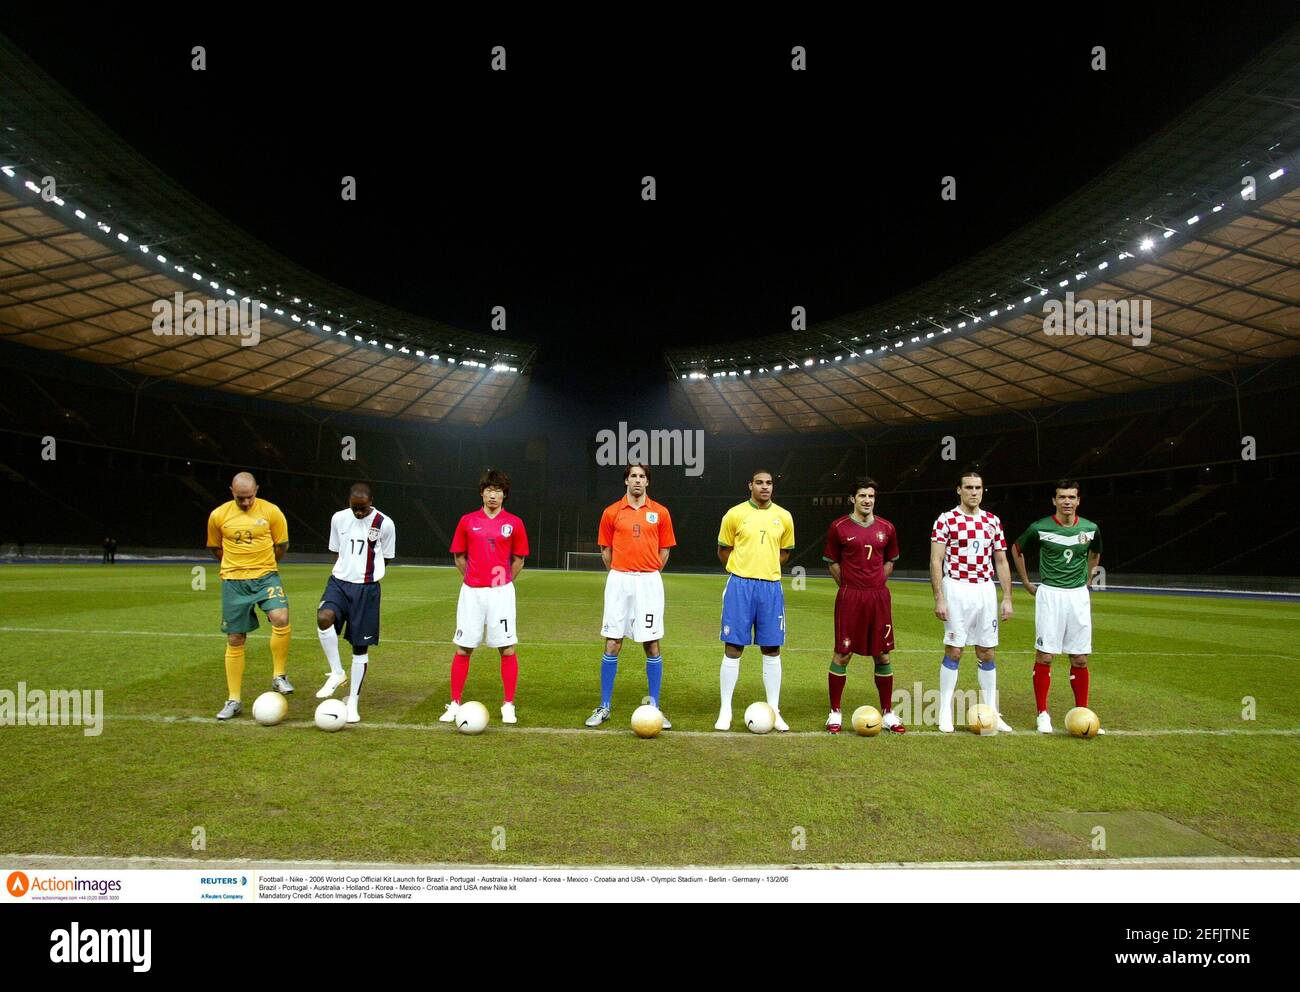 Football - Nike - 2006 World Cup Official Kit Launch for Brazil - Portugal - Australia - Holland - Korea - Mexico - Croatia and USA - Olympic Stadium - Berlin - Germany - 13/2/06  Brazil - Portugal - Australia - Holland - Korea - Mexico - Croatia and USA new Nike kit  Mandatory Credit: Action Images / Tobias Schwarz Stock Photo